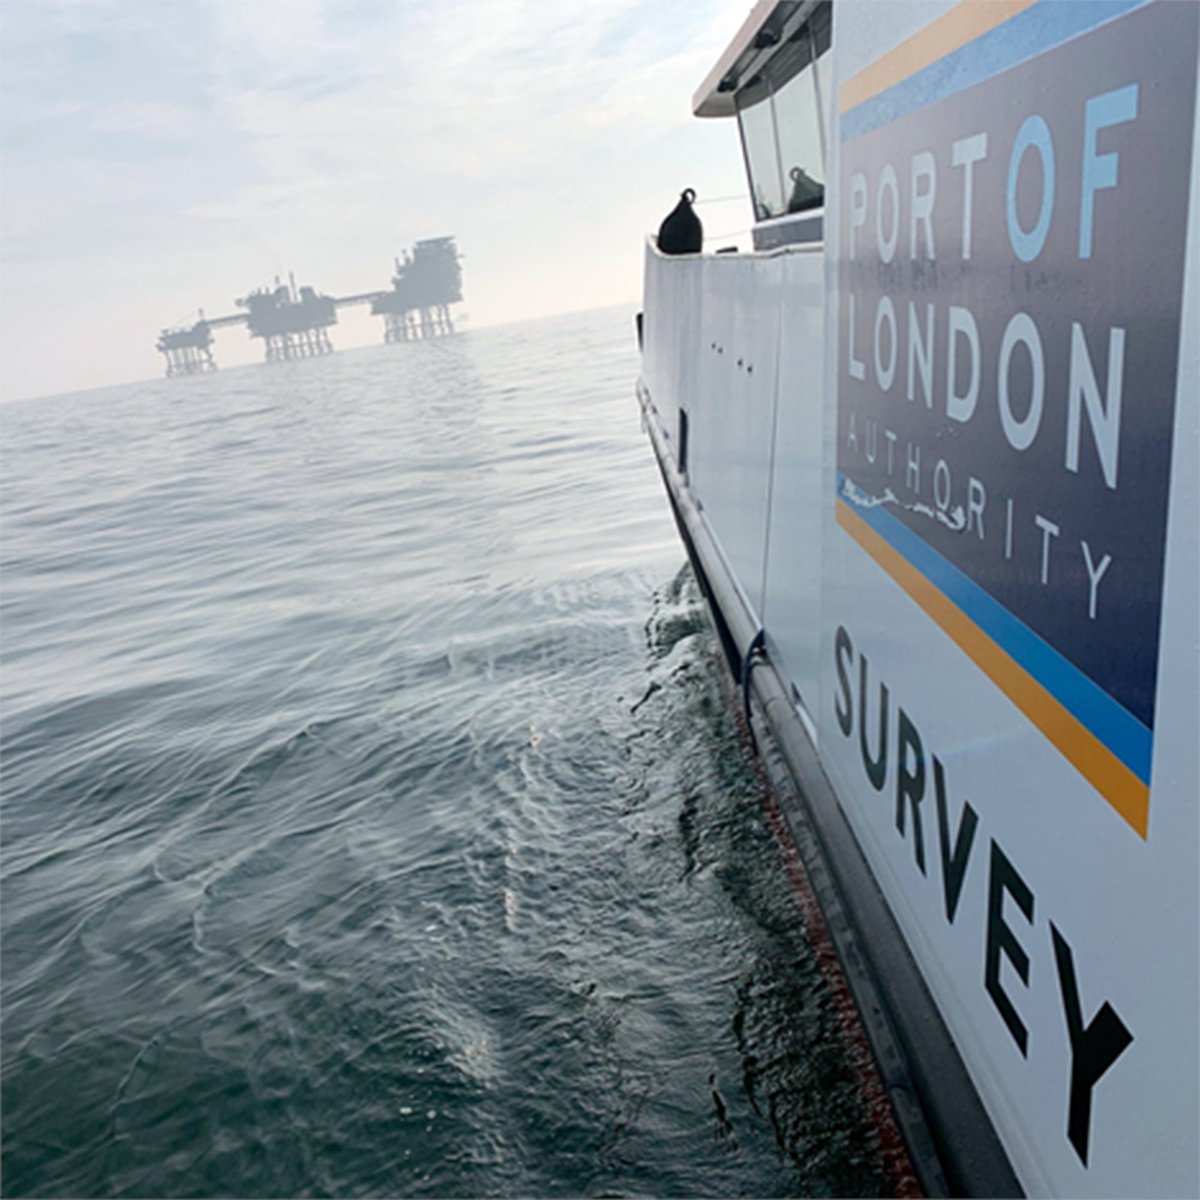 Our Hydrography team can survey your key infrastructure assets in the #Thames Estuary and beyond.

How can they help your business? hubs.la/Q01MvR_N0 #WeKnowtheThames #PortofLondon #PortofInnovation #Hydrography